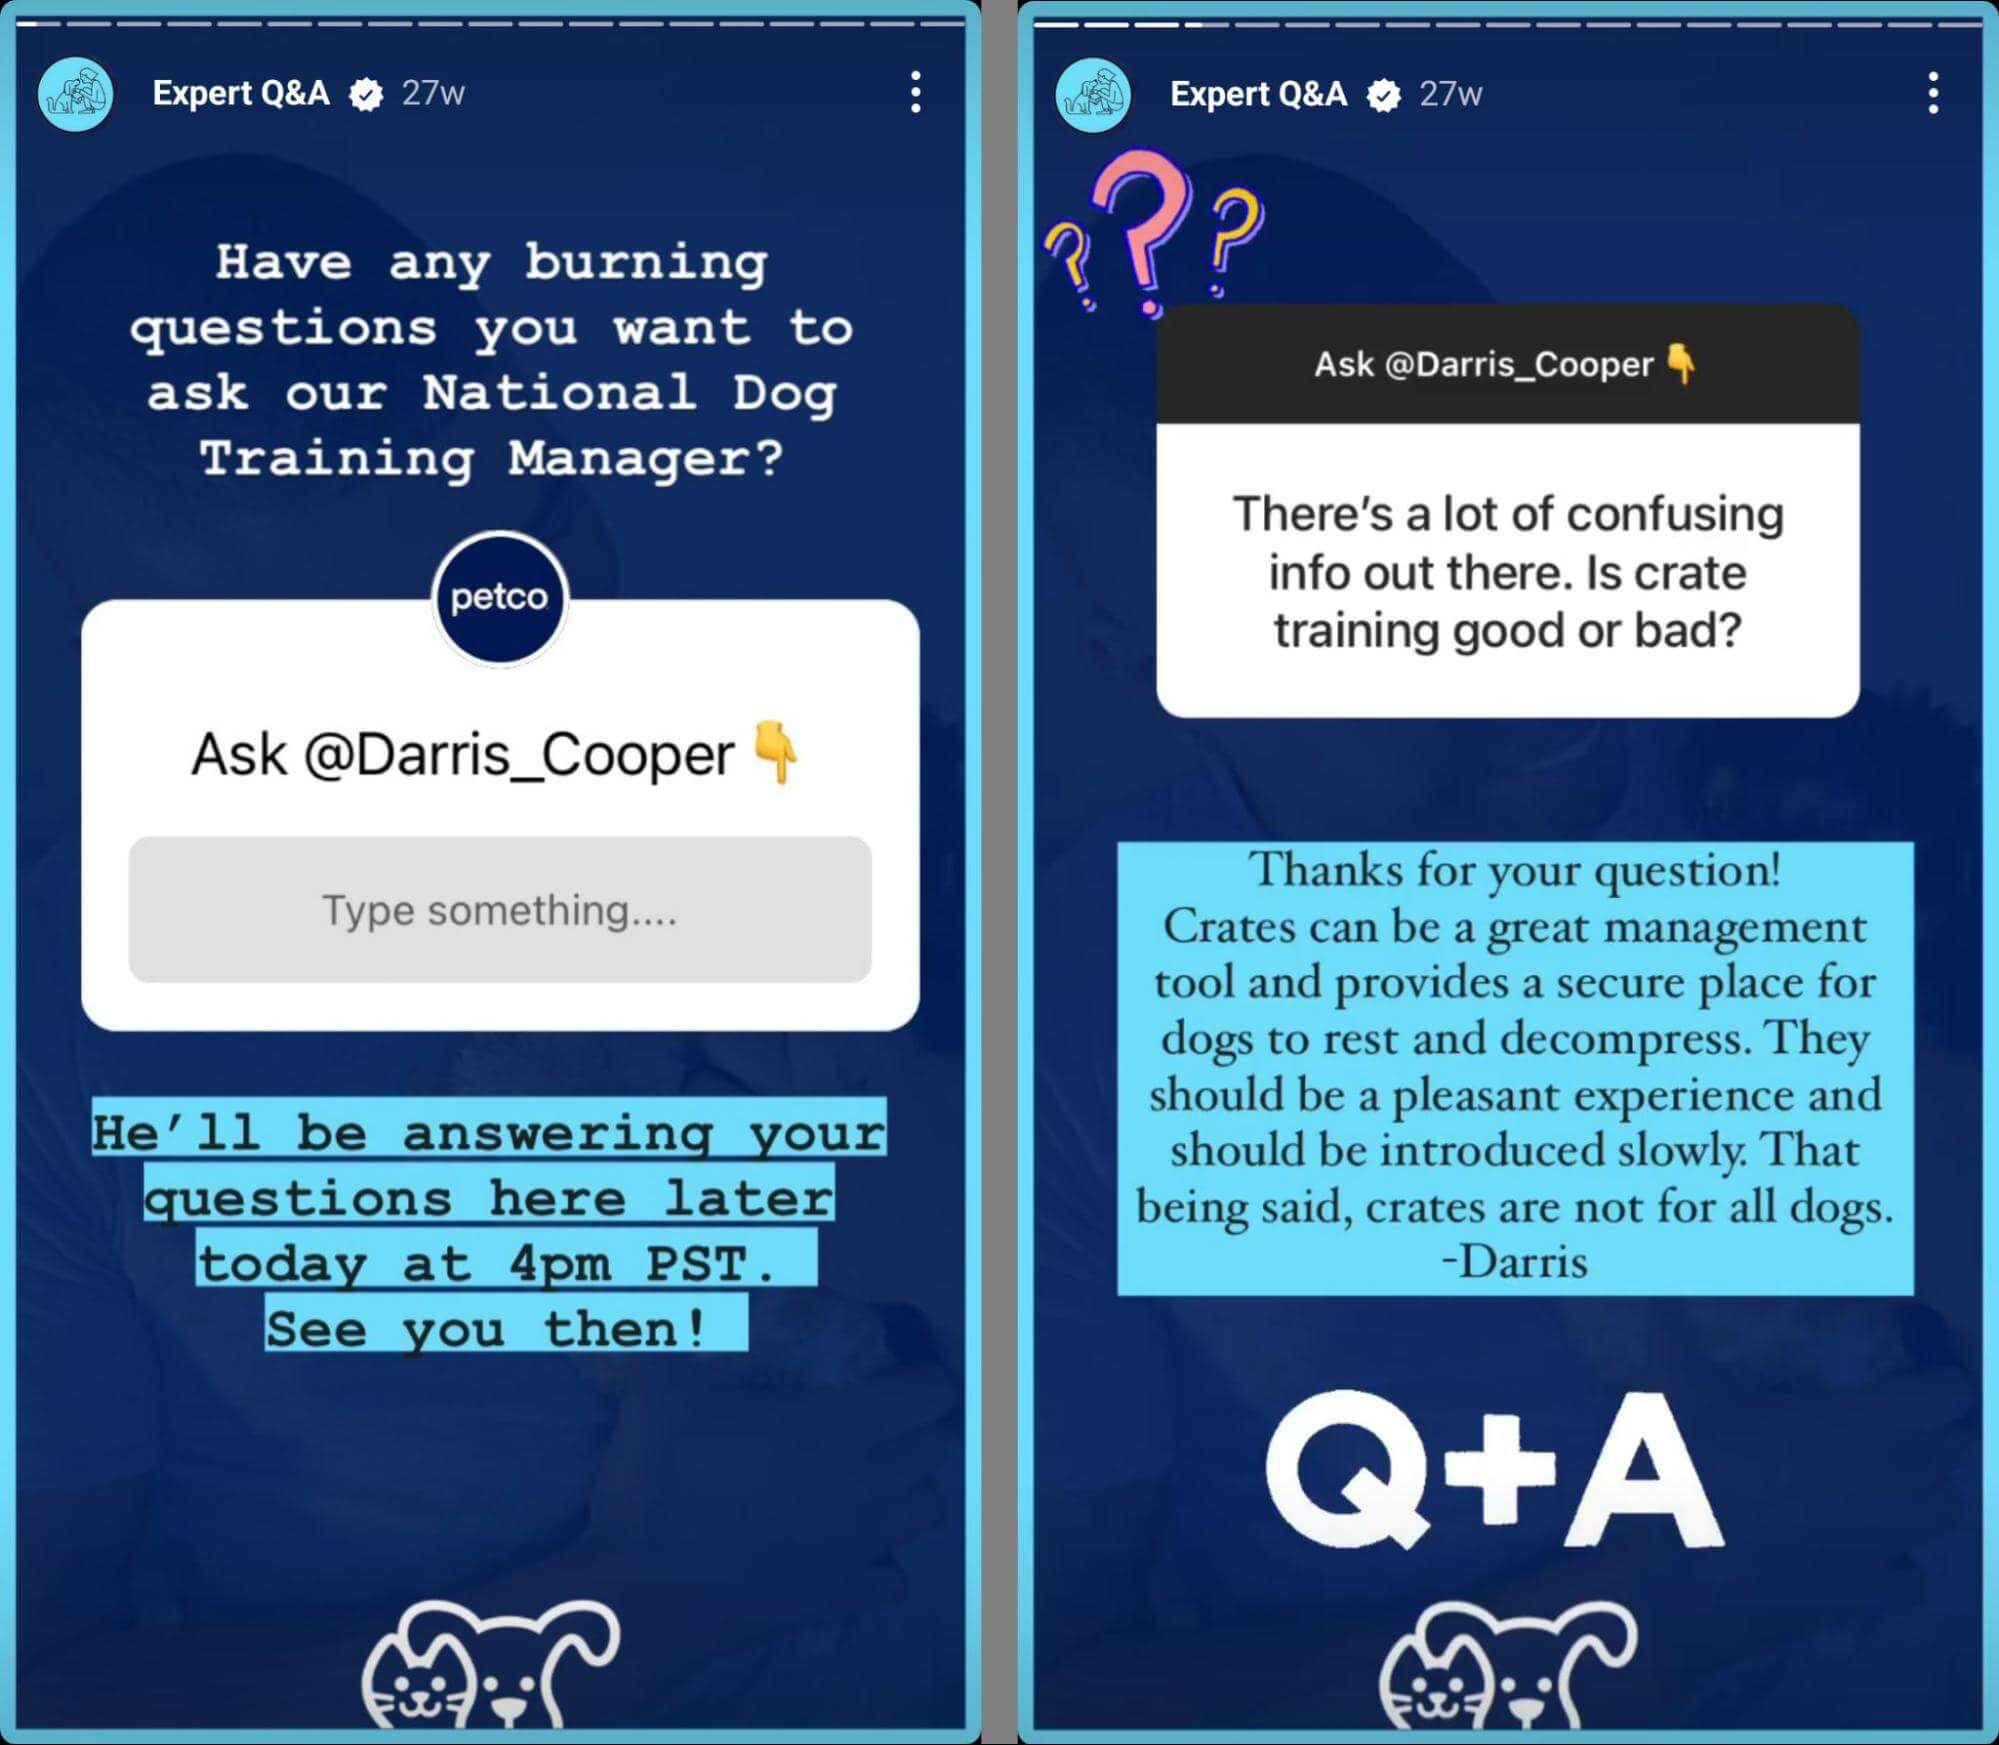 how-to-use-interactive-instagram-story-stickers-boost-engagement-question-invite-followers-to-request-advice-user-submmitted-questions-answers-expert-q-and-a-highlight-petco-example-8